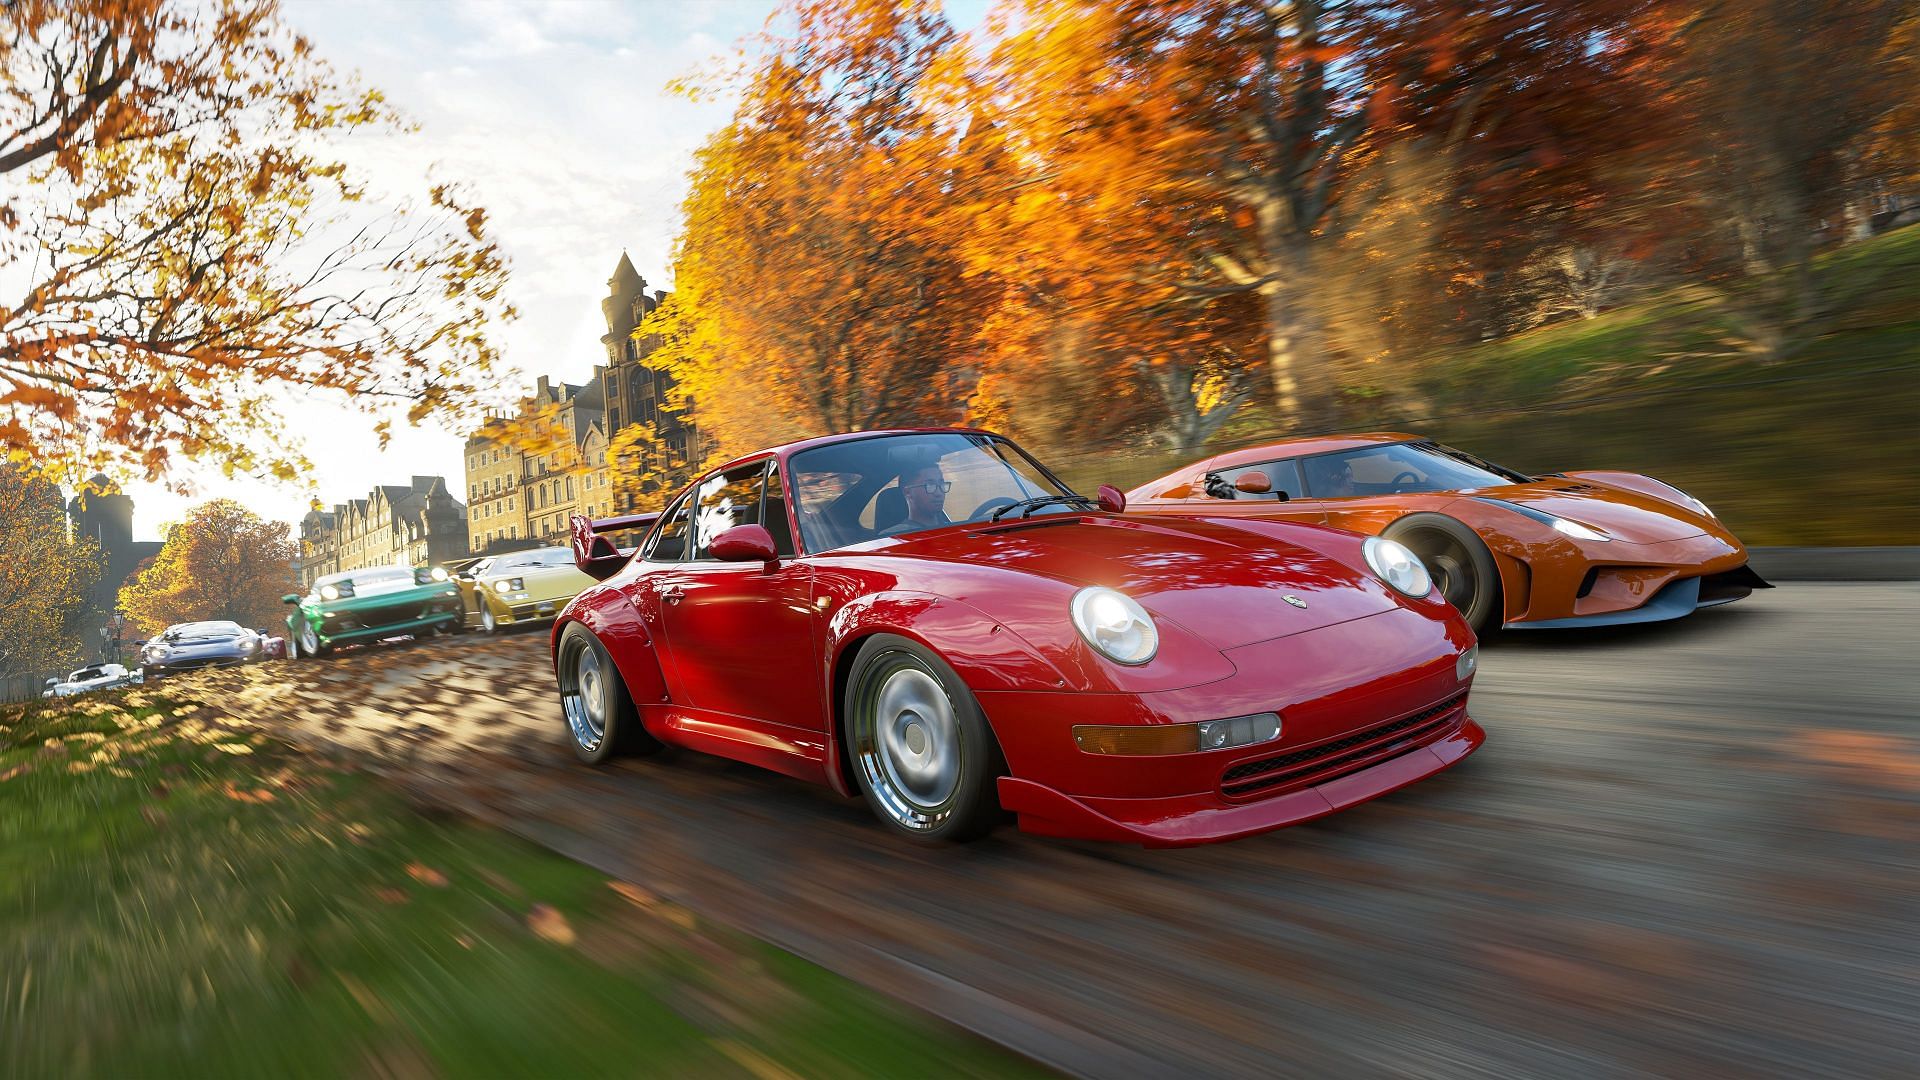 Players should be sure to grab Forza Horizon 4 before it is delisted later this year (Image via Xbox Game Studios)